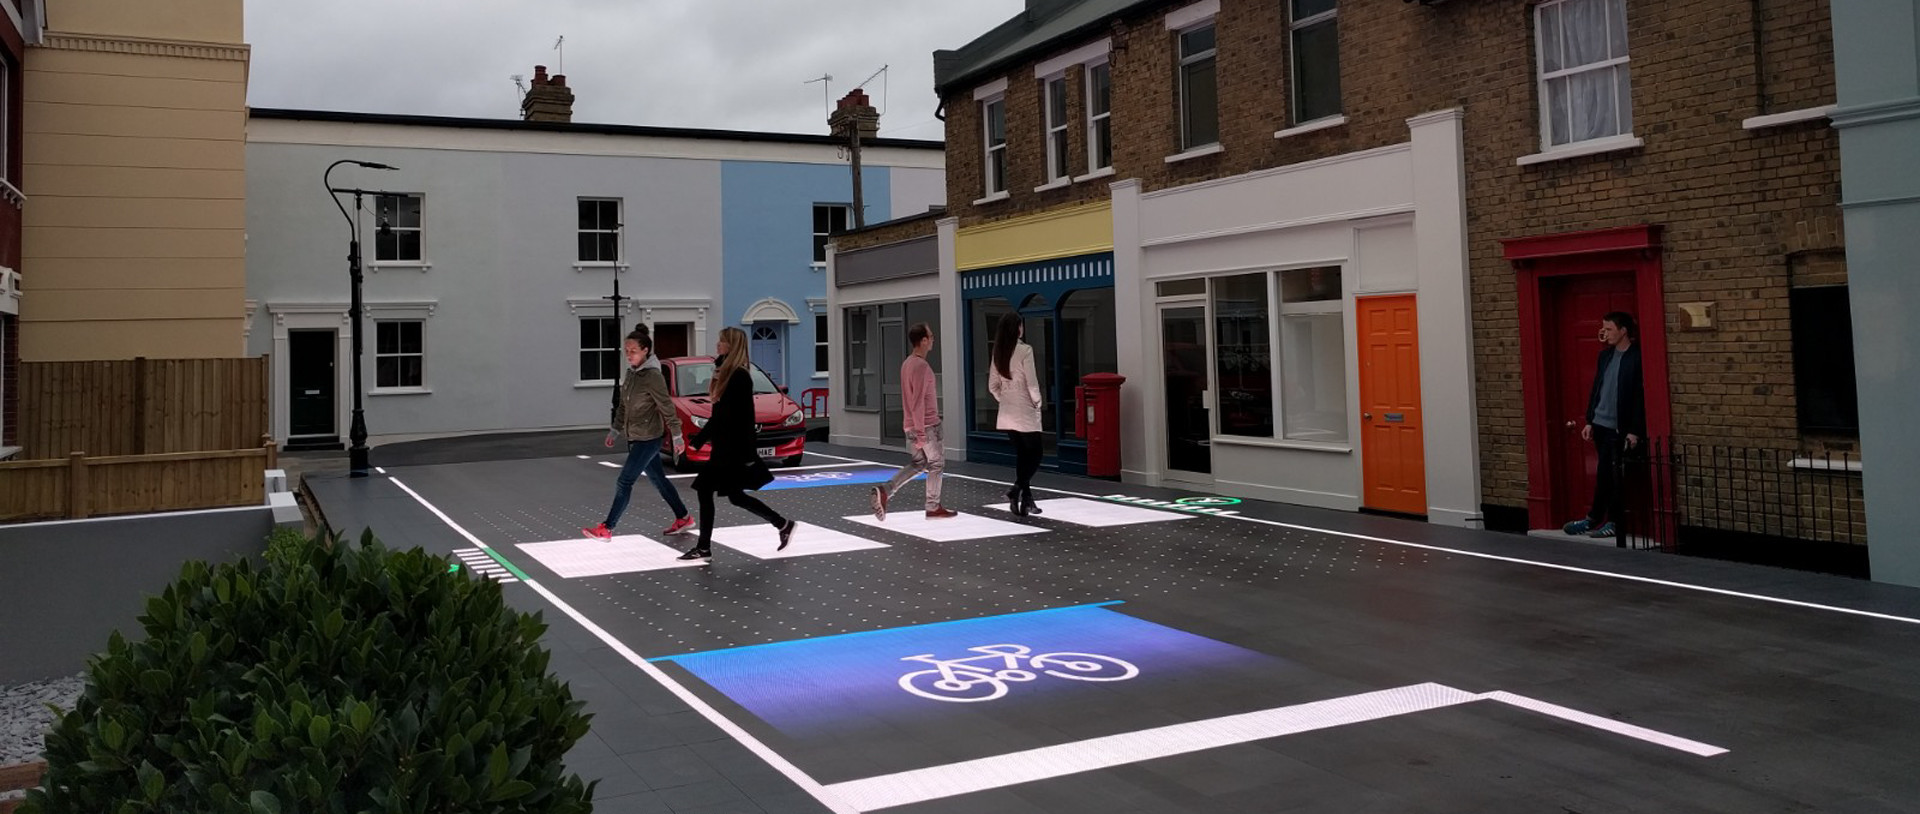 A digital zebra crossing could be the future of our roads